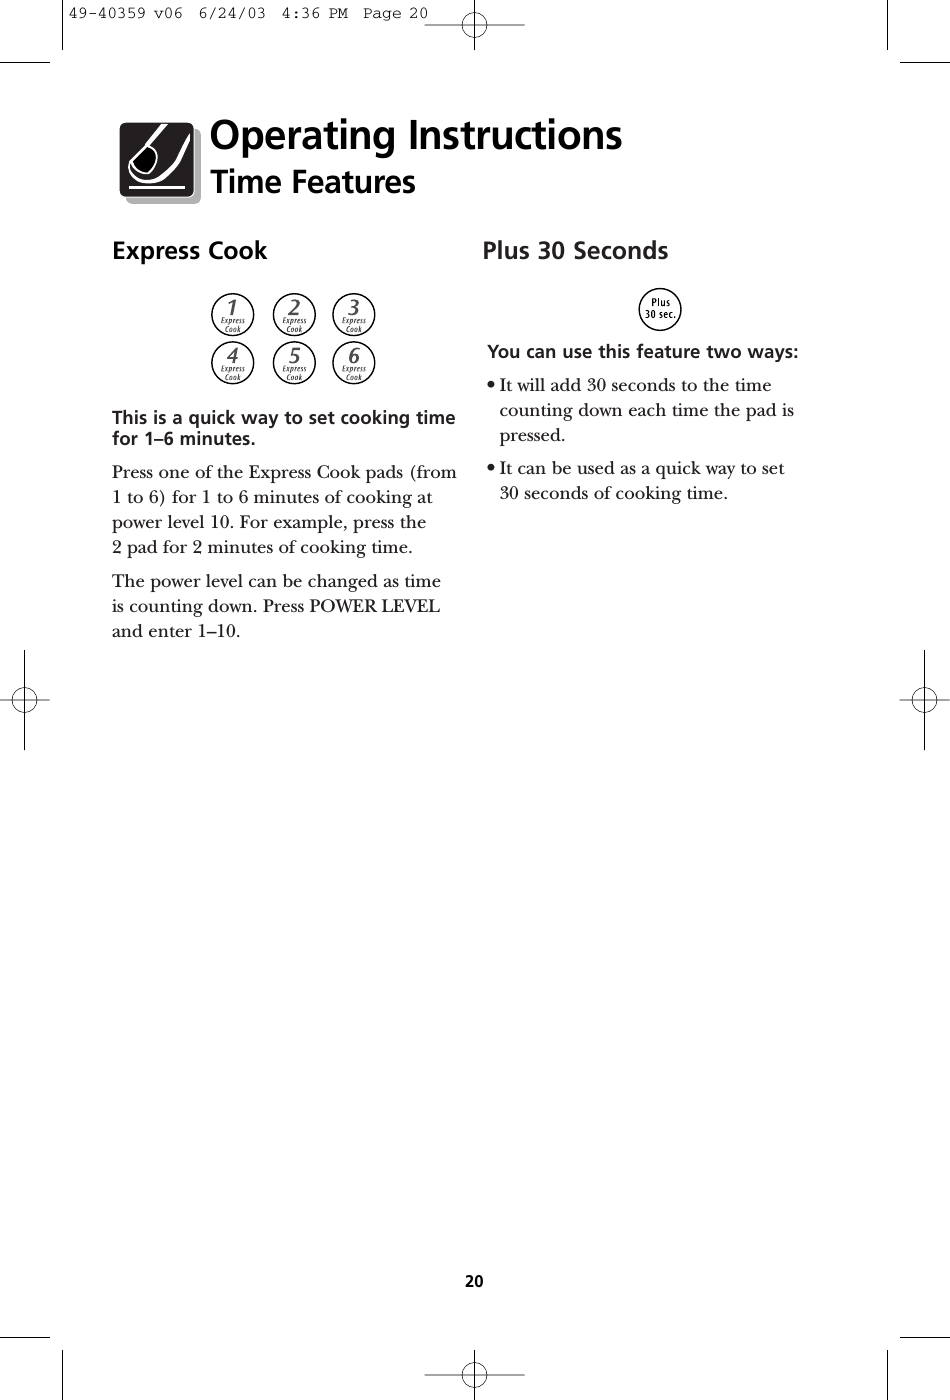 Plus 30 SecondsThis is a quick way to set cooking timefor 1–6 minutes.Press one of the Express Cook pads (from1 to 6) for 1 to 6 minutes of cooking atpower level 10. For example, press the 2 pad for 2 minutes of cooking time. The power level can be changed as time is counting down. Press POWER LEVELand enter 1–10.You can use this feature two ways:•It will add 30 seconds to the timecounting down each time the pad ispressed.•It can be used as a quick way to set 30 seconds of cooking time.Express Cook20Operating InstructionsTime Features49-40359 v06  6/24/03  4:36 PM  Page 20